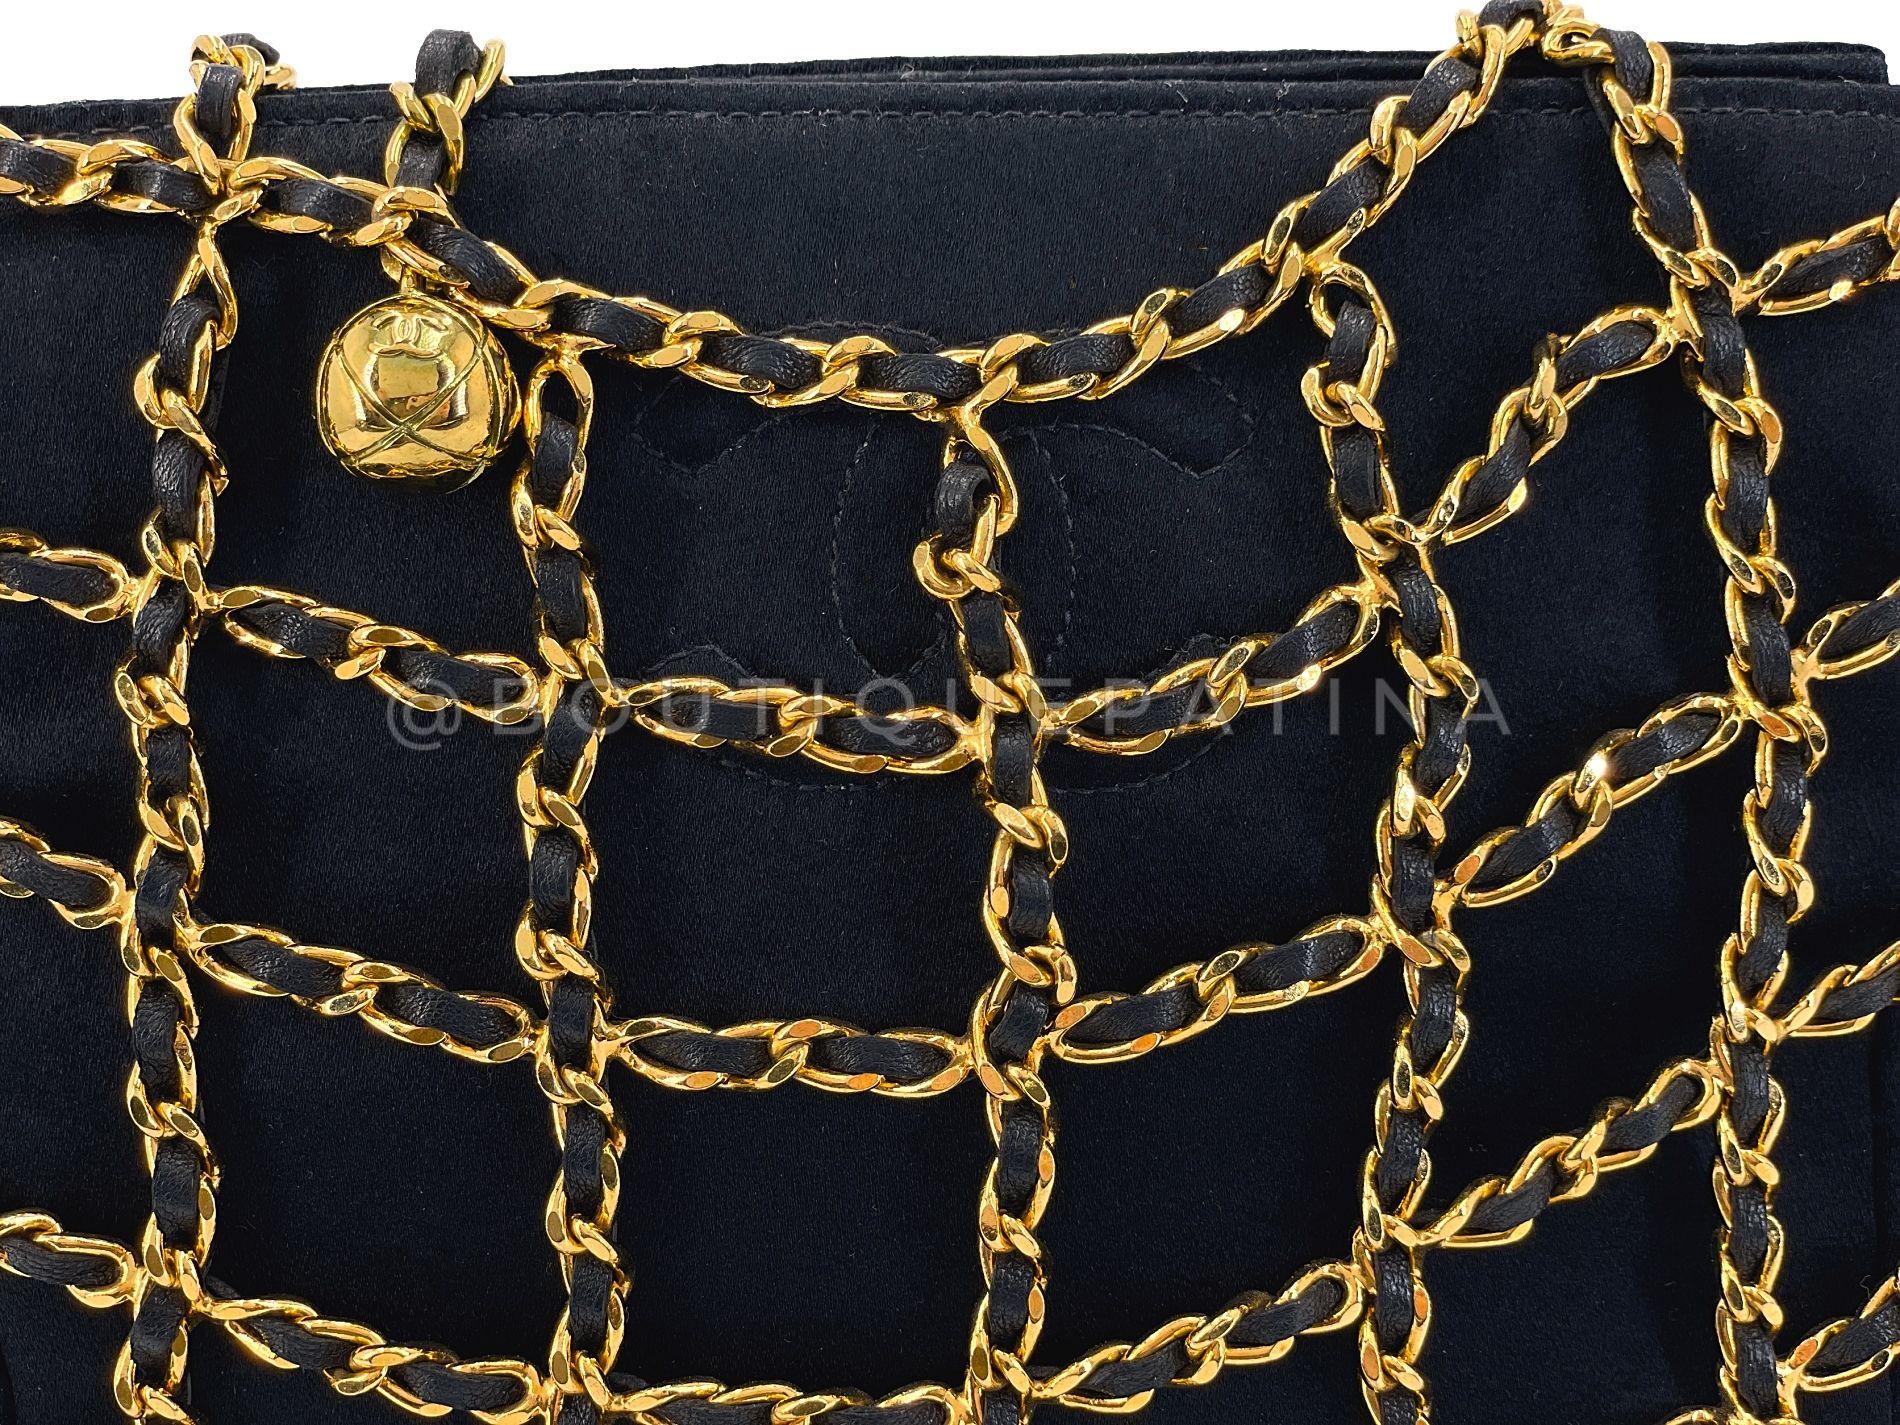 Rare Chanel 1994 Miniature Caged Silk Evening Bag 24k GHW 68049 For Sale 3